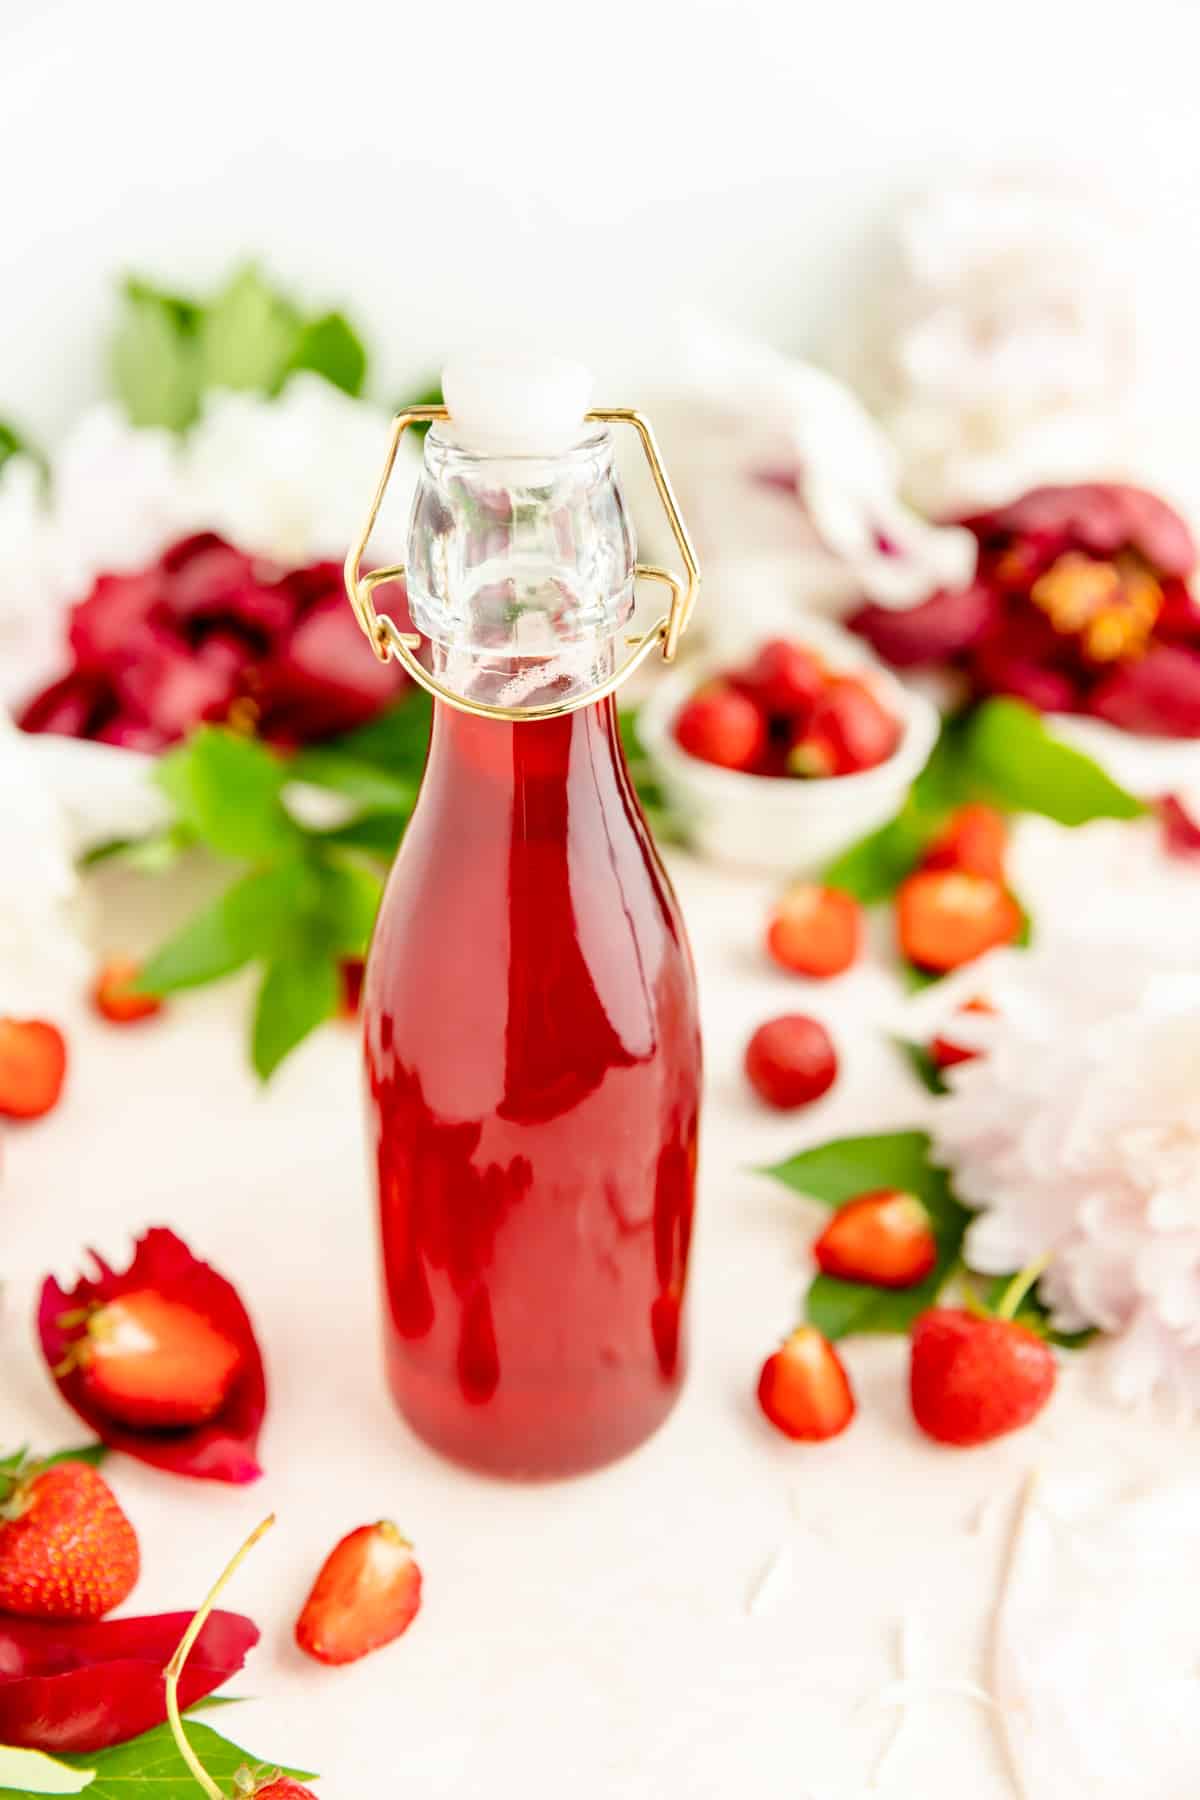 Close-up of red strawberry syrup in glass bottle with flowers and berries on table.